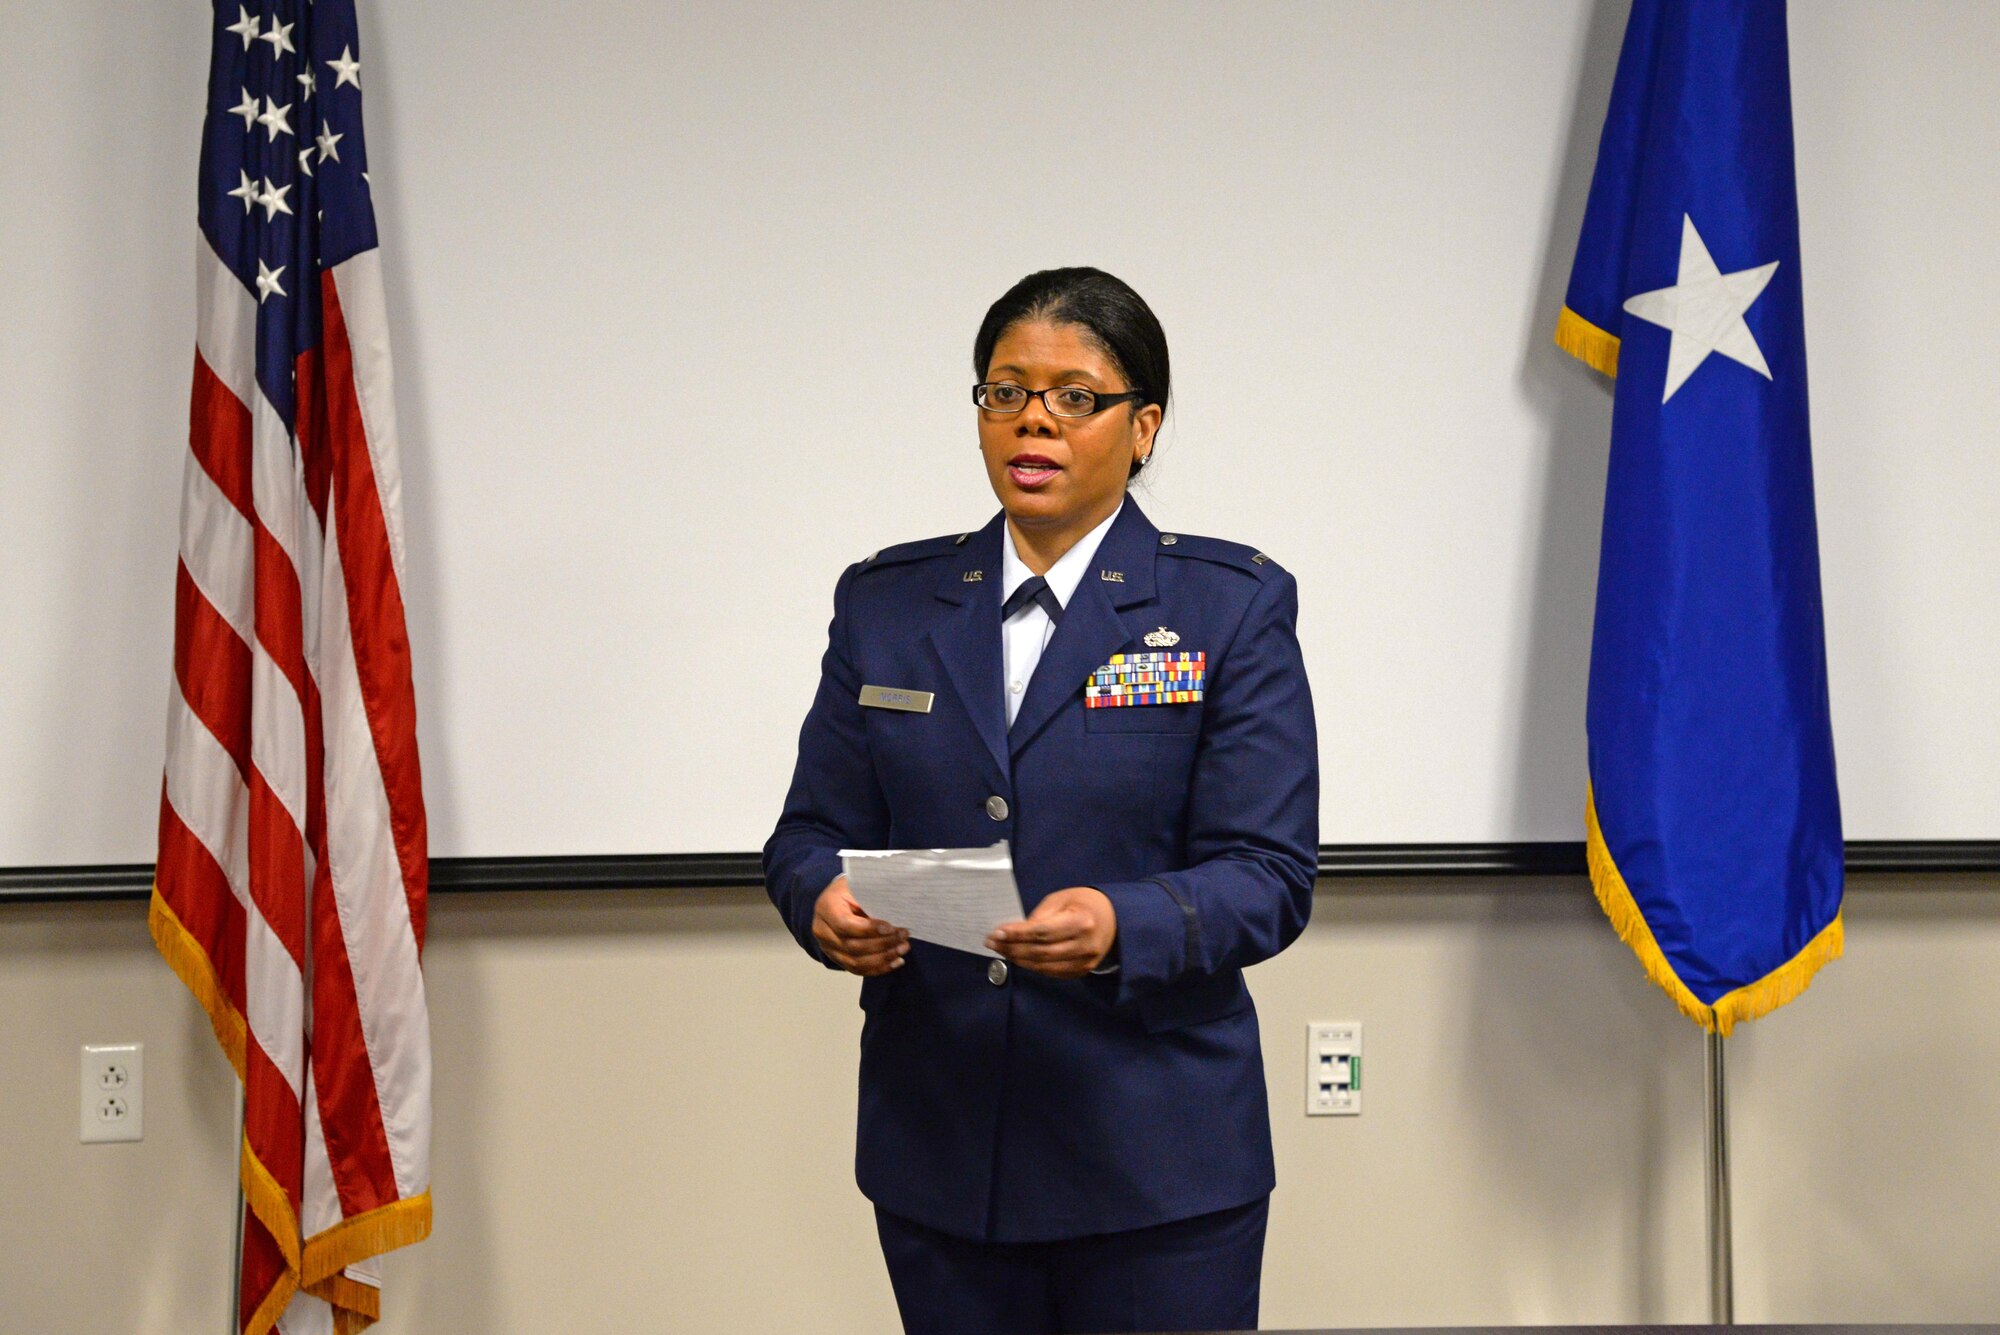 A picture of U.S. Air Force 1st Lt. Anita Morris, a chaplain with the New Jersey Air National Guard's 177th Fighter Wing, speaking to a group of senior leaders, friends and family.